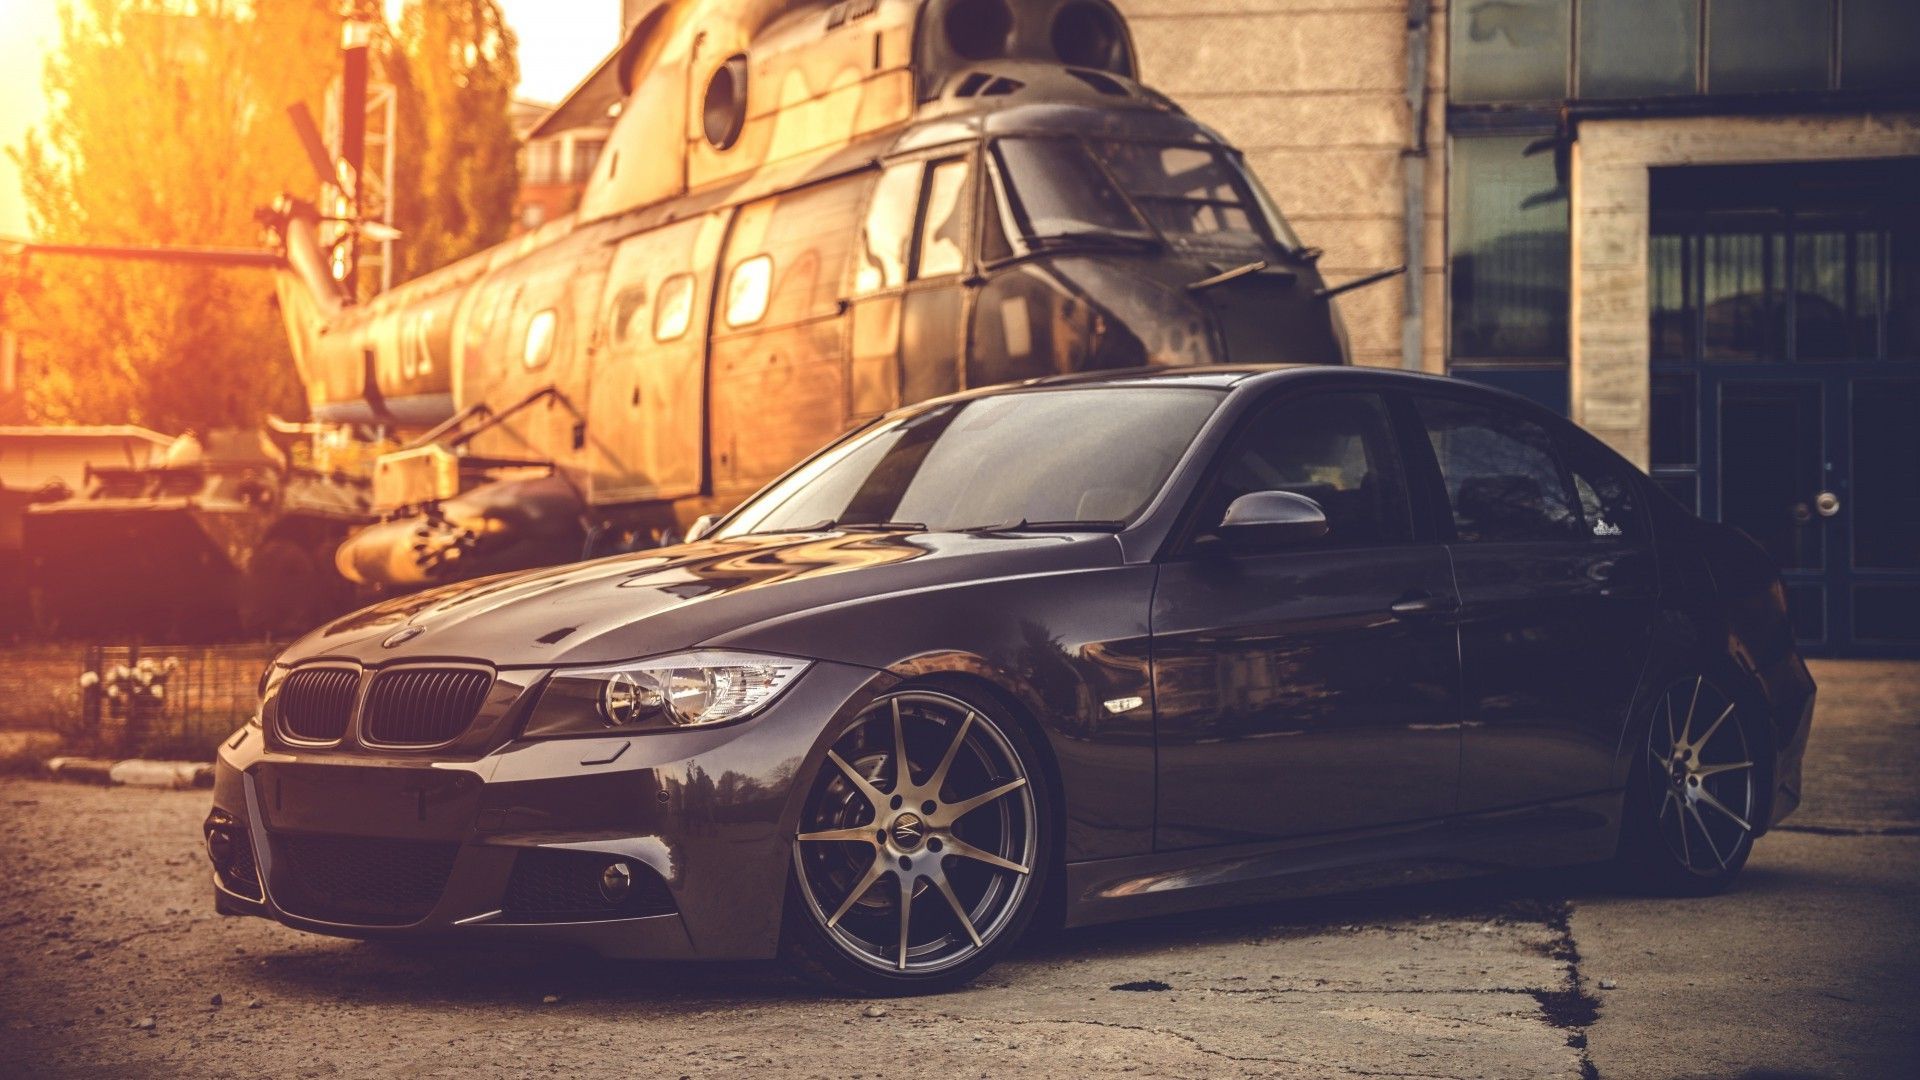 BMW E90, Car, Helicopters, Black, Military, BMW Wallpapers HD